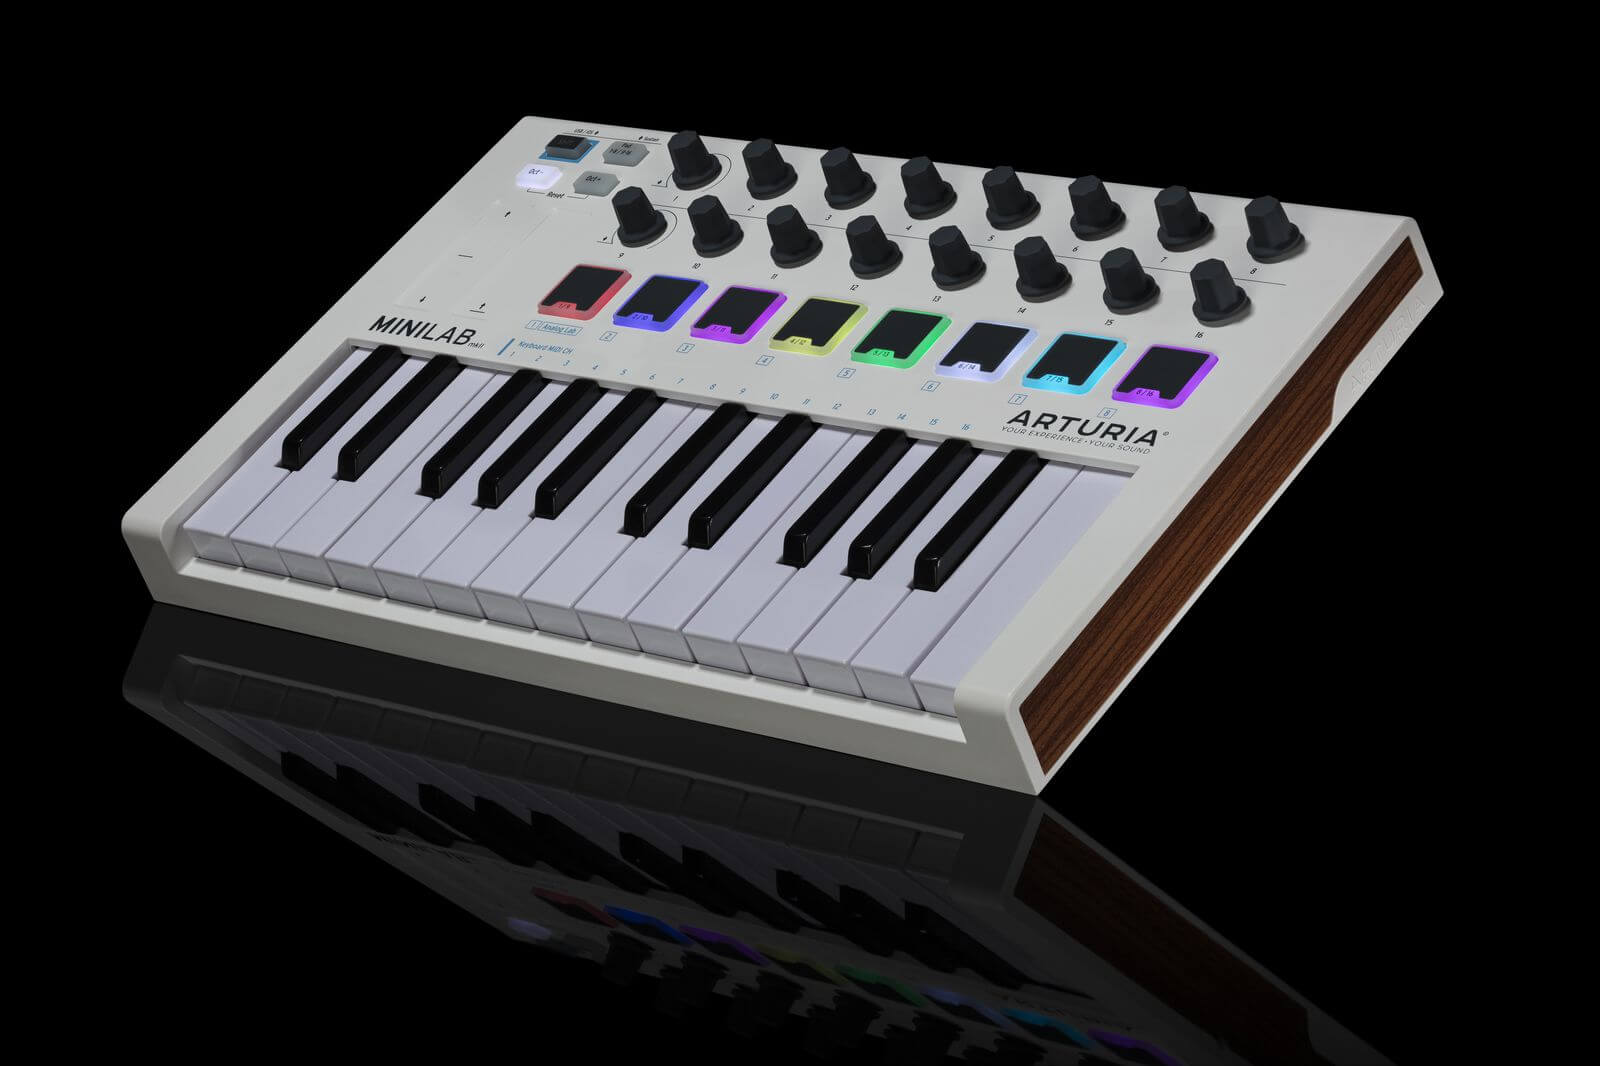 The ARTURIA MiniLab MKII has 25 mini keys, 8 pads and 16 knobs for transport controls across virtual software and DAW integration.